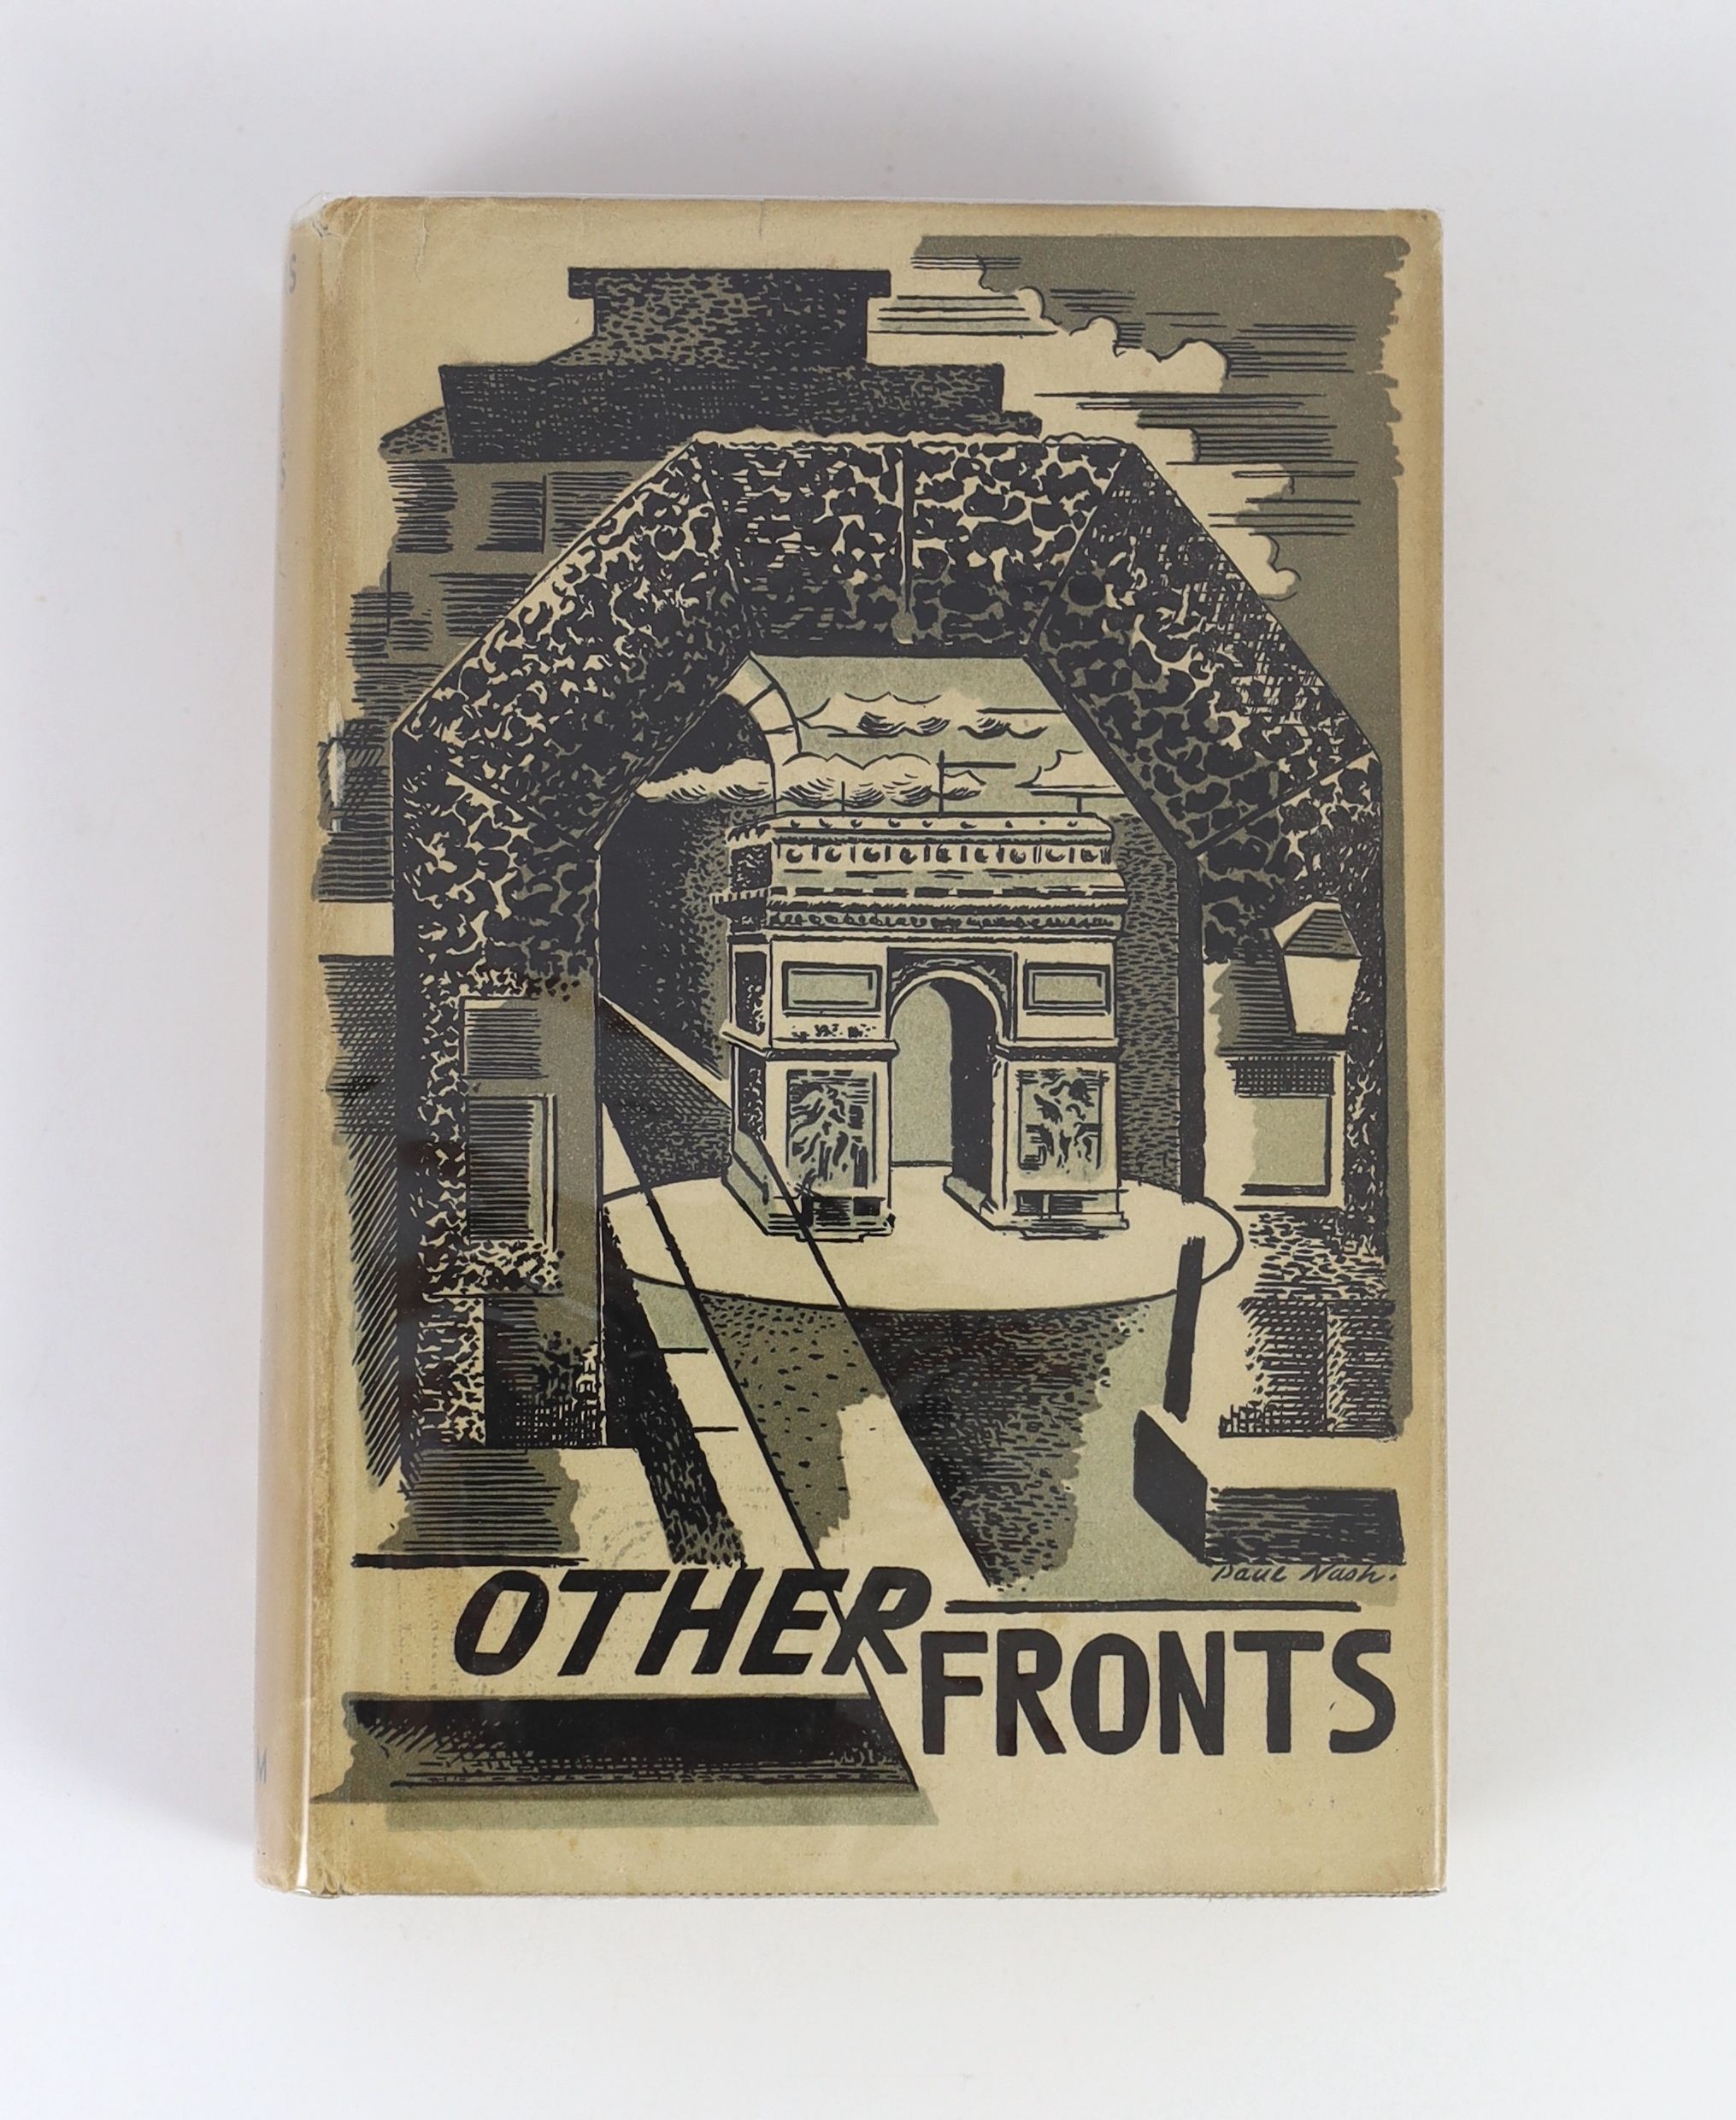 Anon (John Rodker) - Memoirs of Other Fronts. 1st ed. Publishers cloth with letters direct on spine and original printed d/j designed by Paul Nash. 8vo. Putnam, London, 1932.